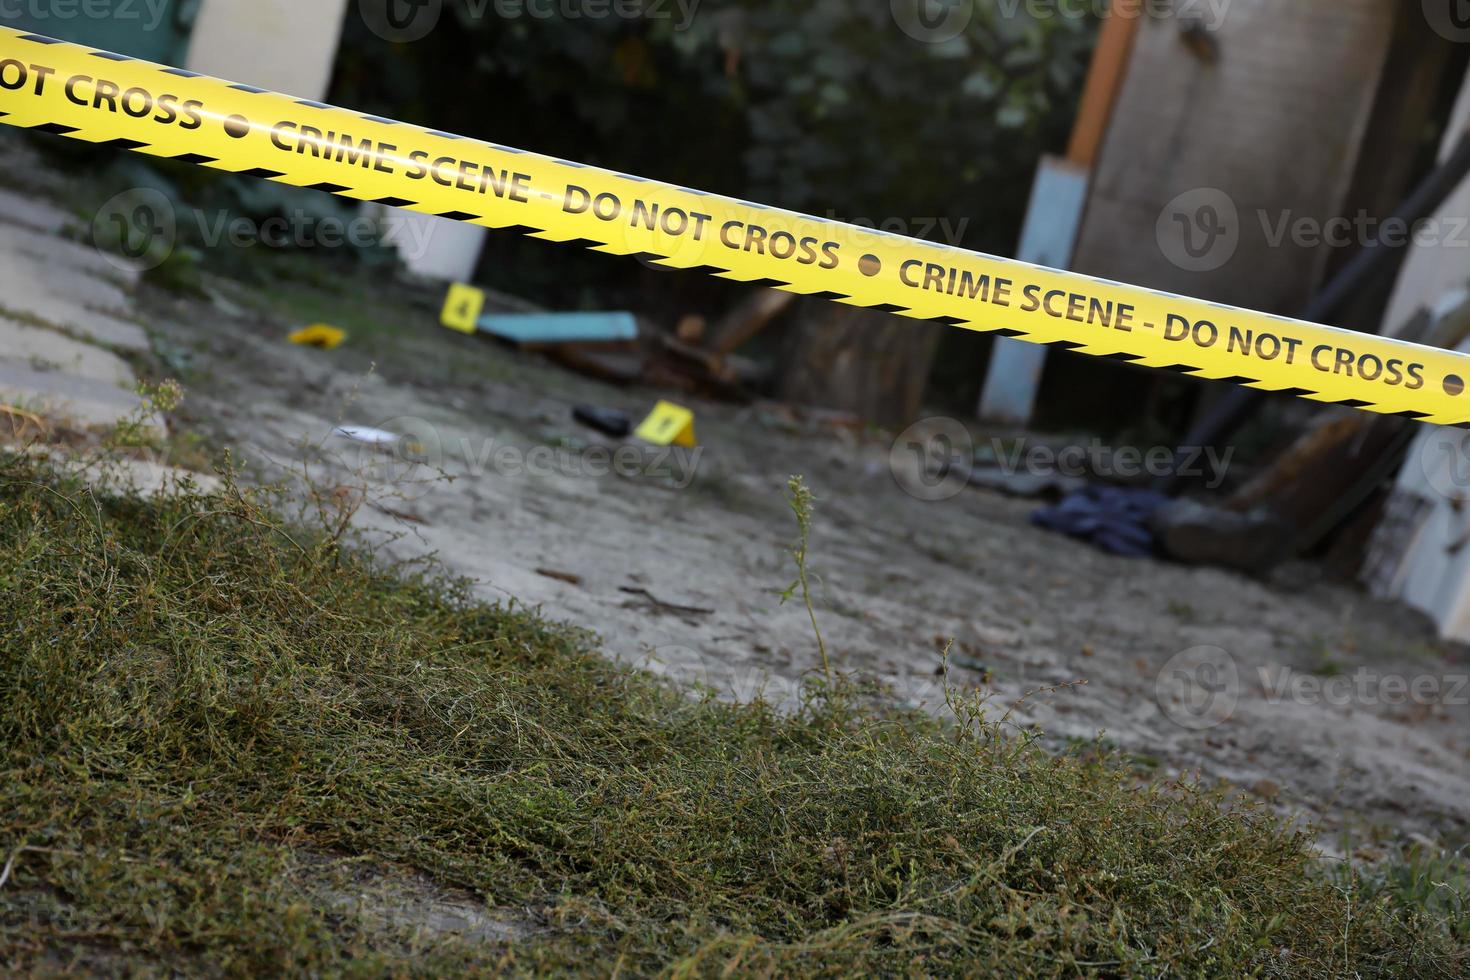 Victim of a violent crime in a backyard of residental house in evening. Dead man body under the yellow police line tape and evidence markers on crime scene photo